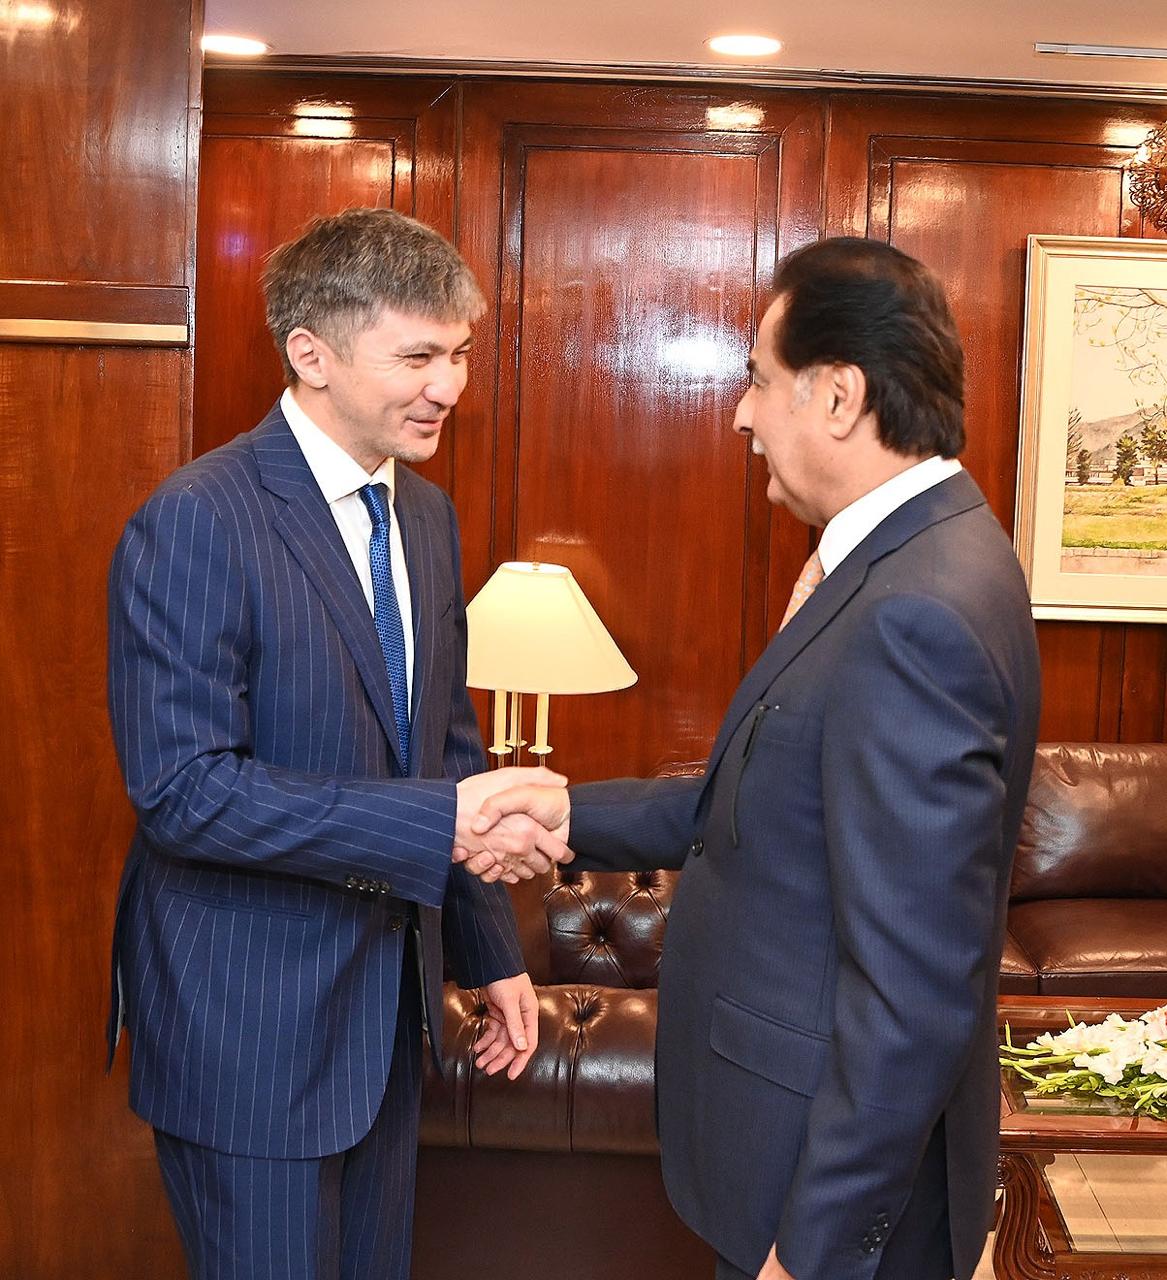 Speaker Of The National Assembly Of The Islamic Republic Of Pakistan: “Pakistan Attaches Great Importance To Strengthening Fraternal Relations With Kazakhstan”